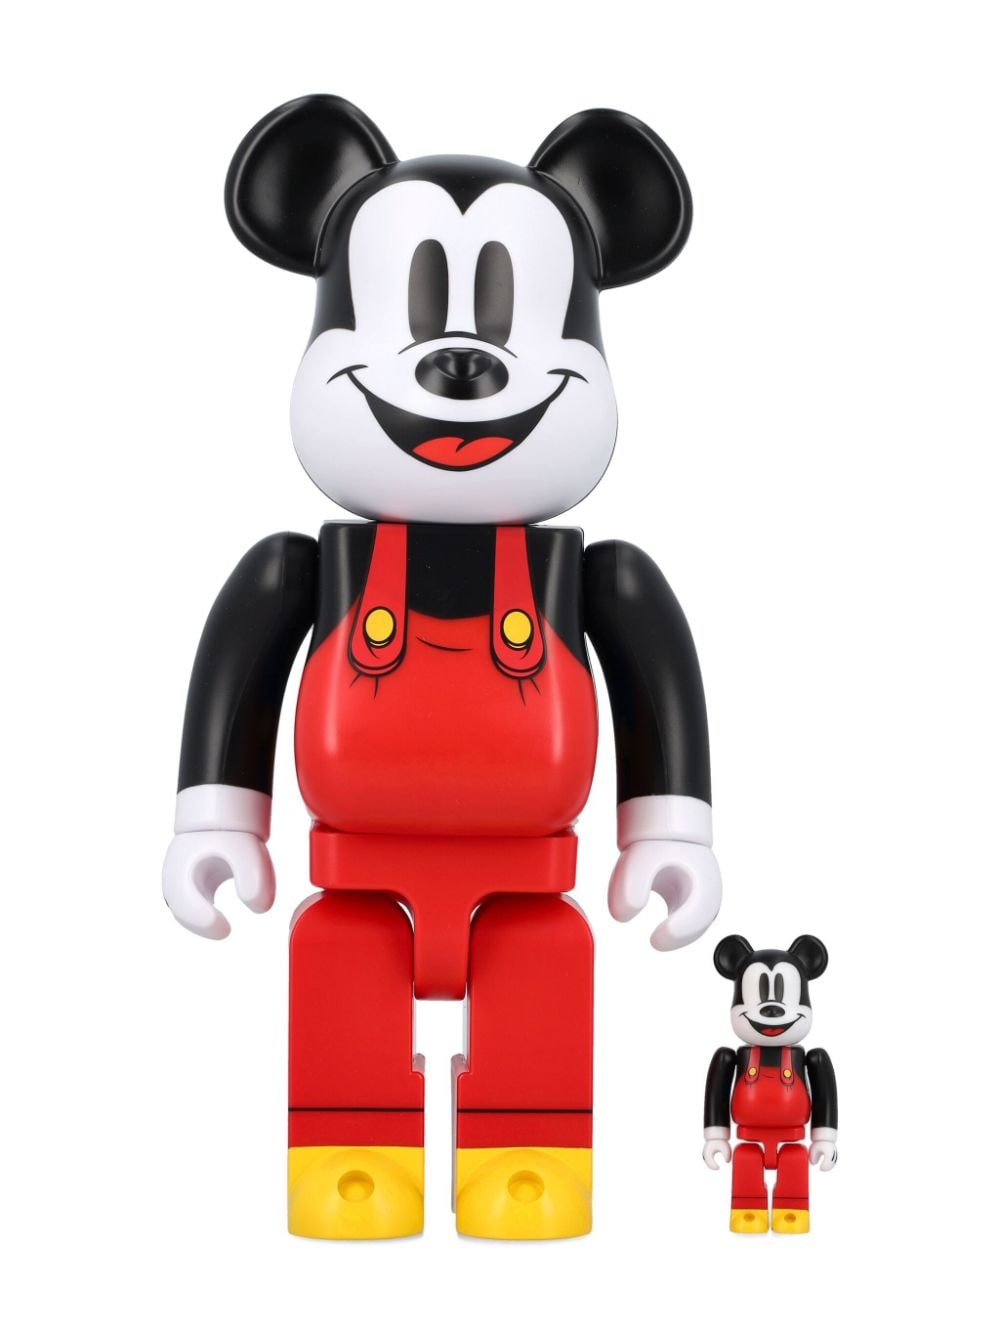 Medicom Toy Mickey Mouse Be@rbrick 400% Figure In Red